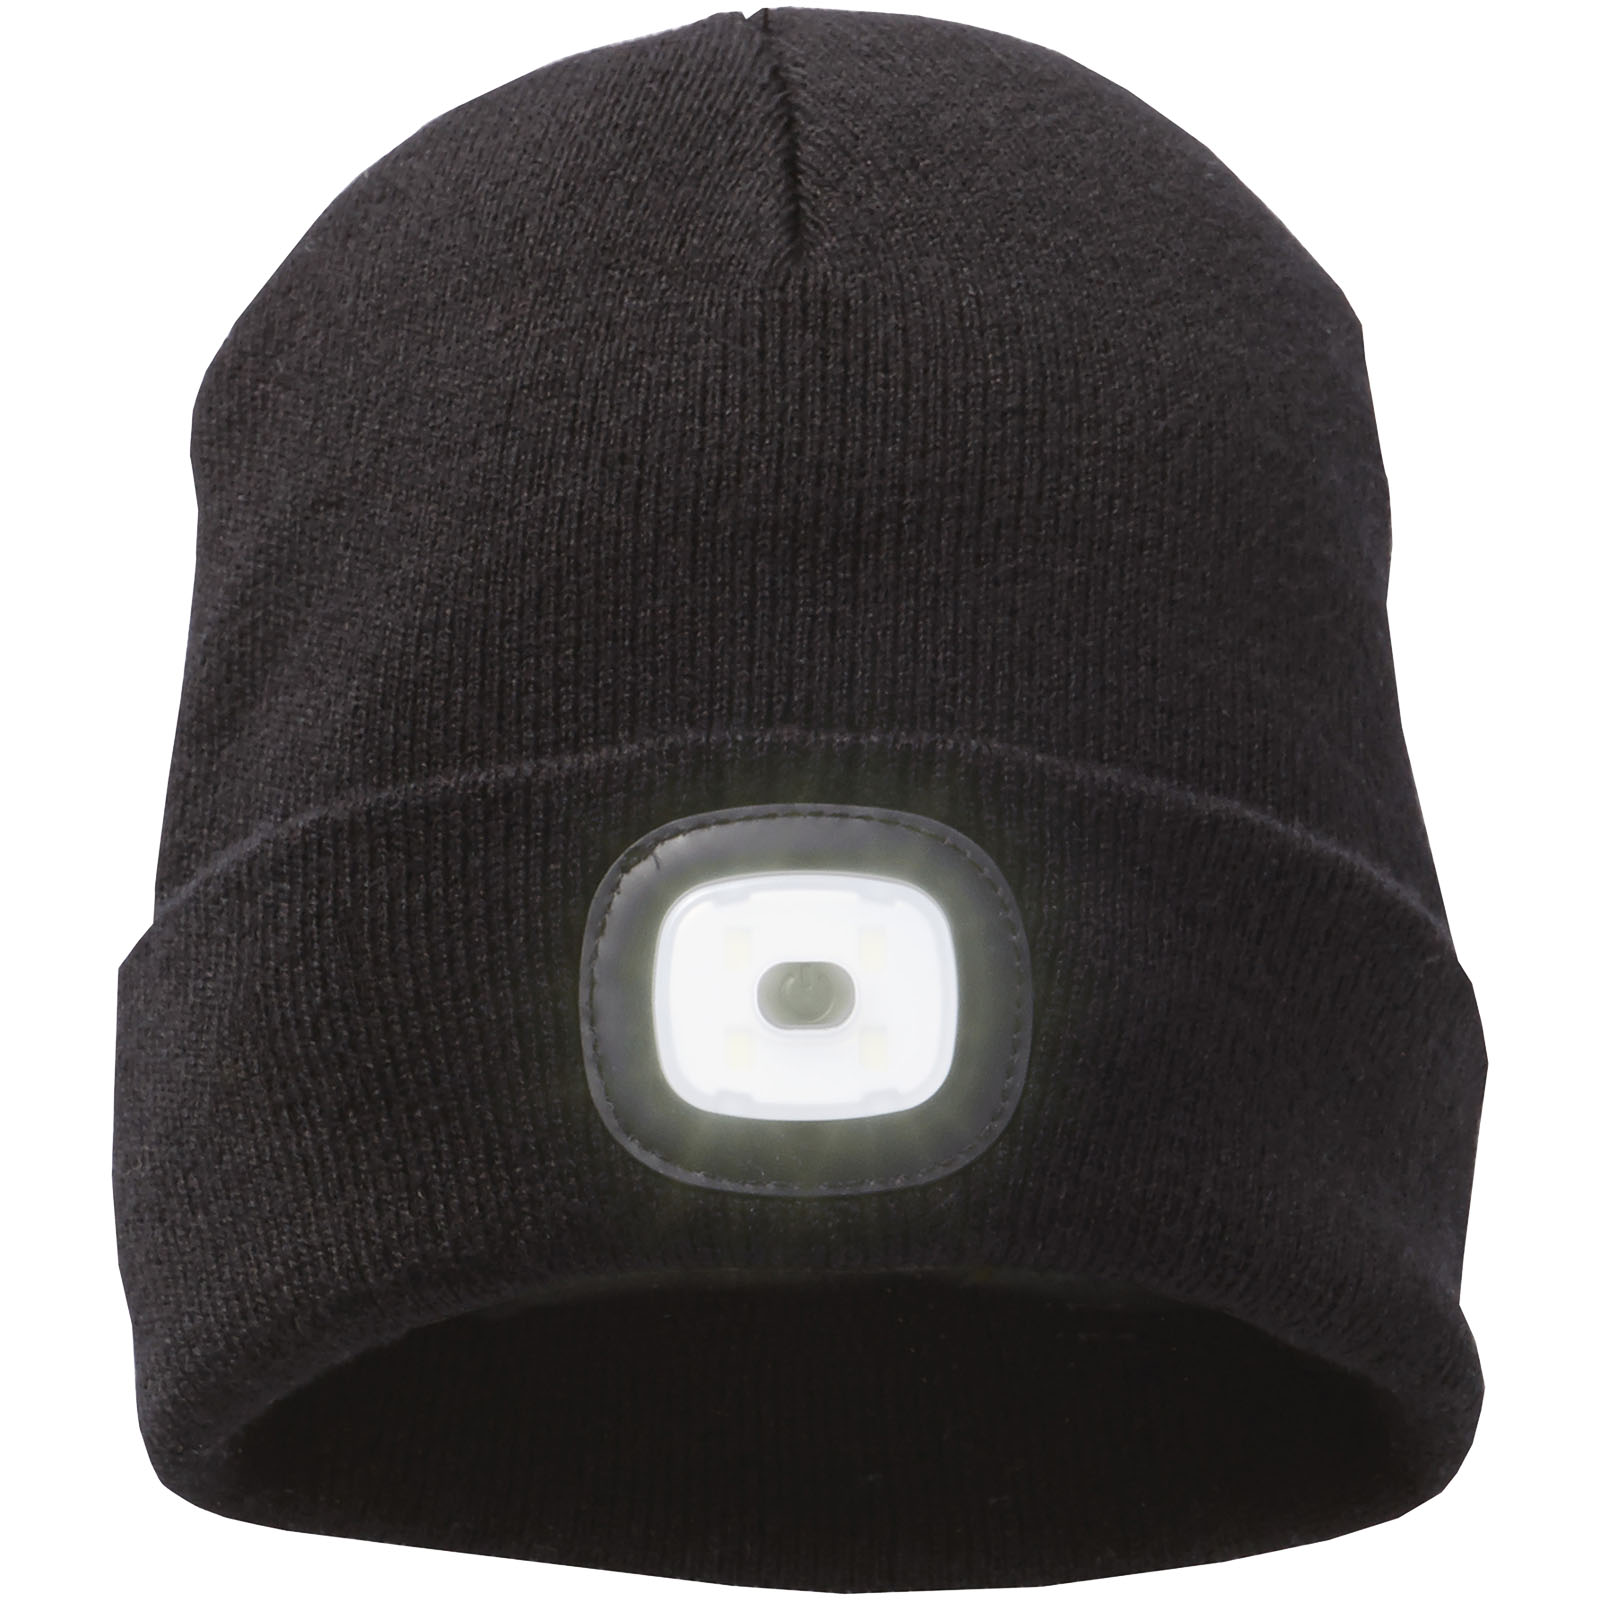 Advertising Beanies - Mighty LED knit beanie - 0